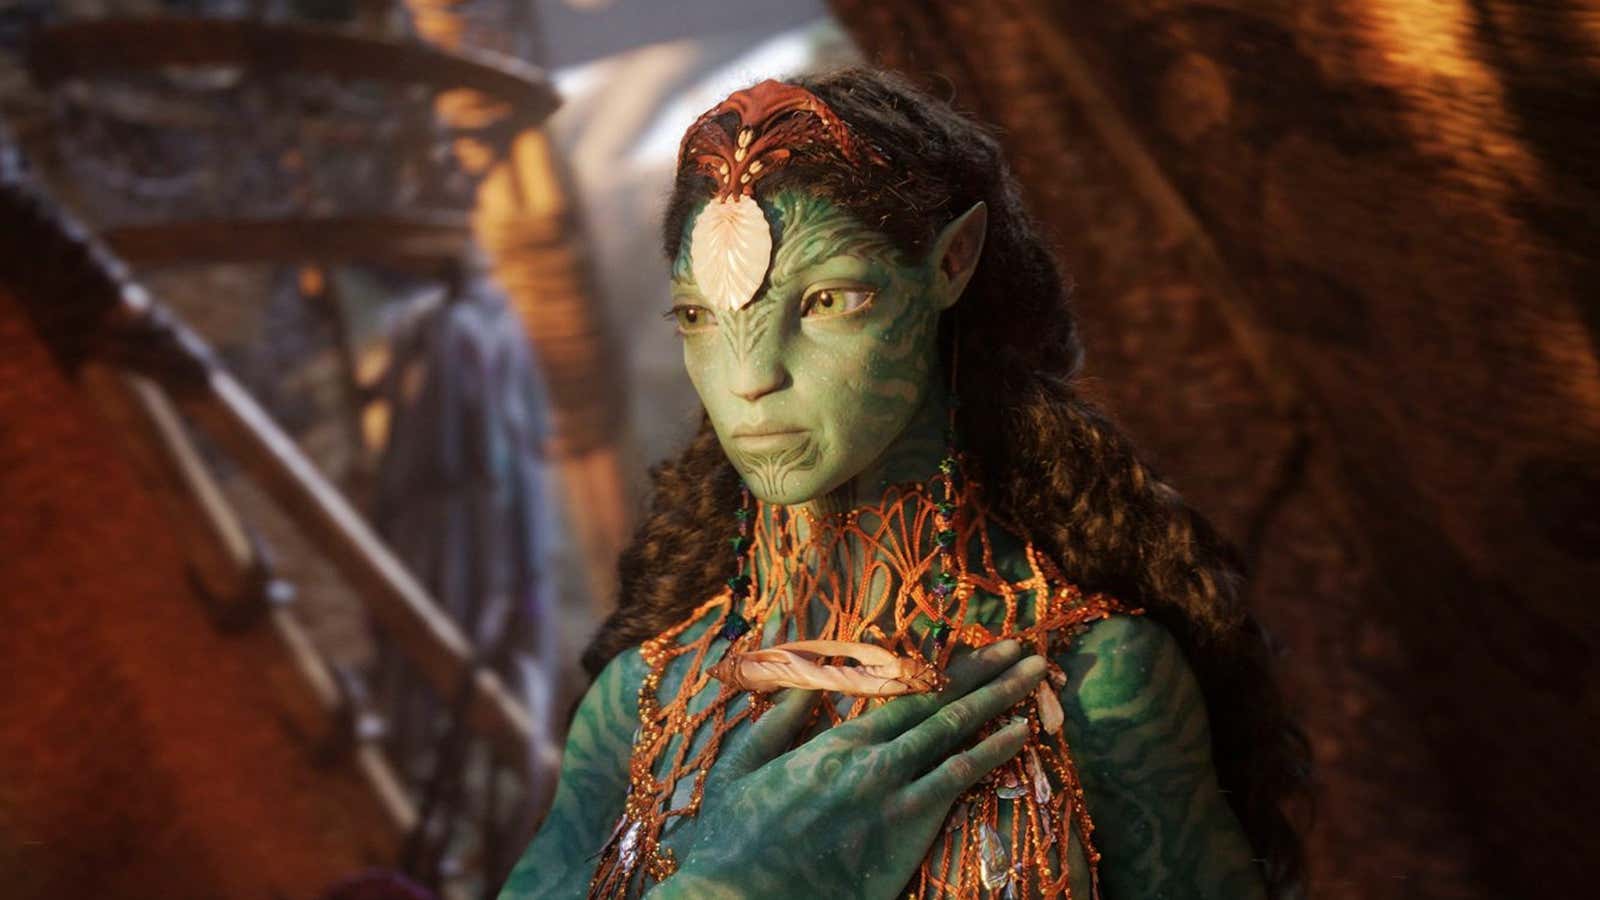 A Na’vi character in a scene from “Avatar: The Way of Water”